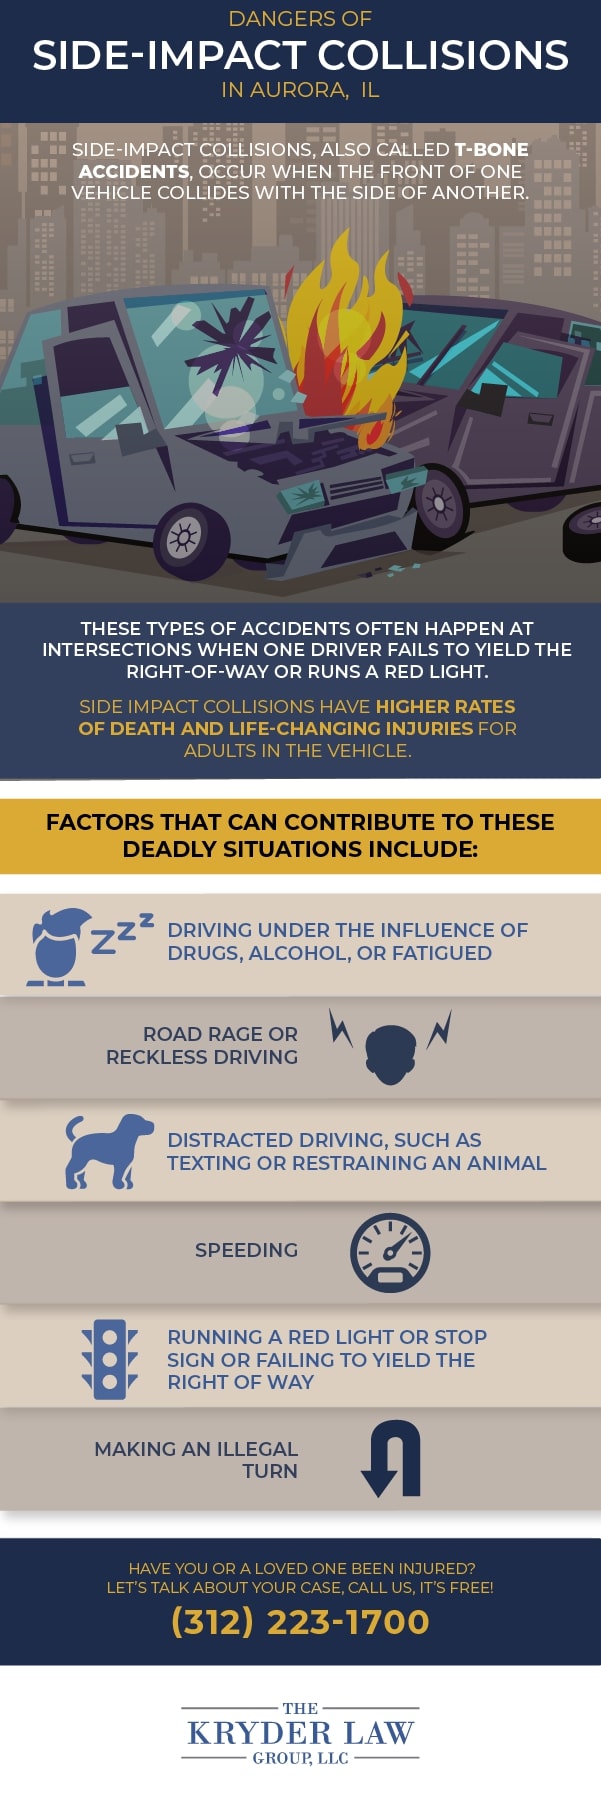 Aurora Side-Impact Collisions Lawyer Infographic